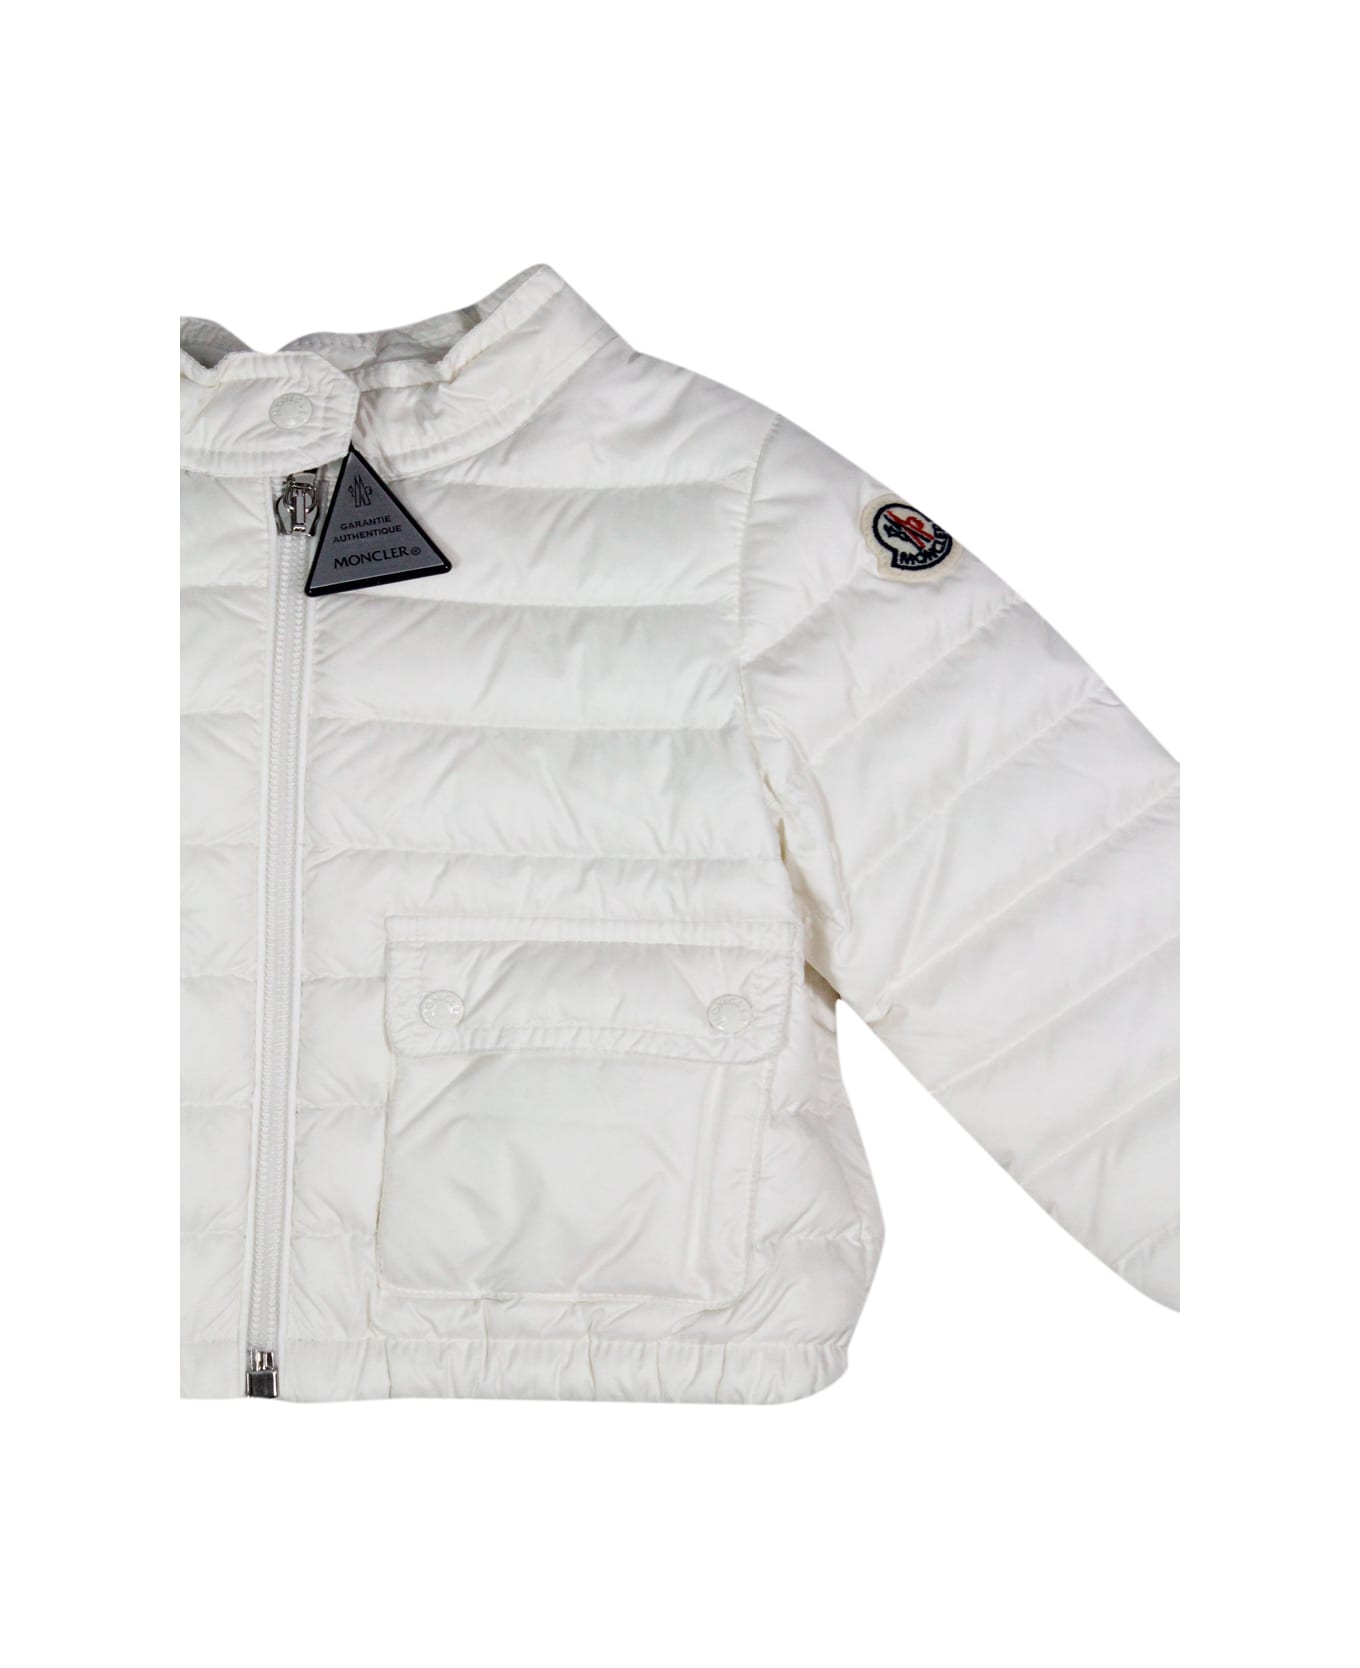 Moncler Lightweight 100 Gram Lans Long-sleeved Down Jacket With Front Zip Closure And Front Pockets. Logo On The Sleeve - White